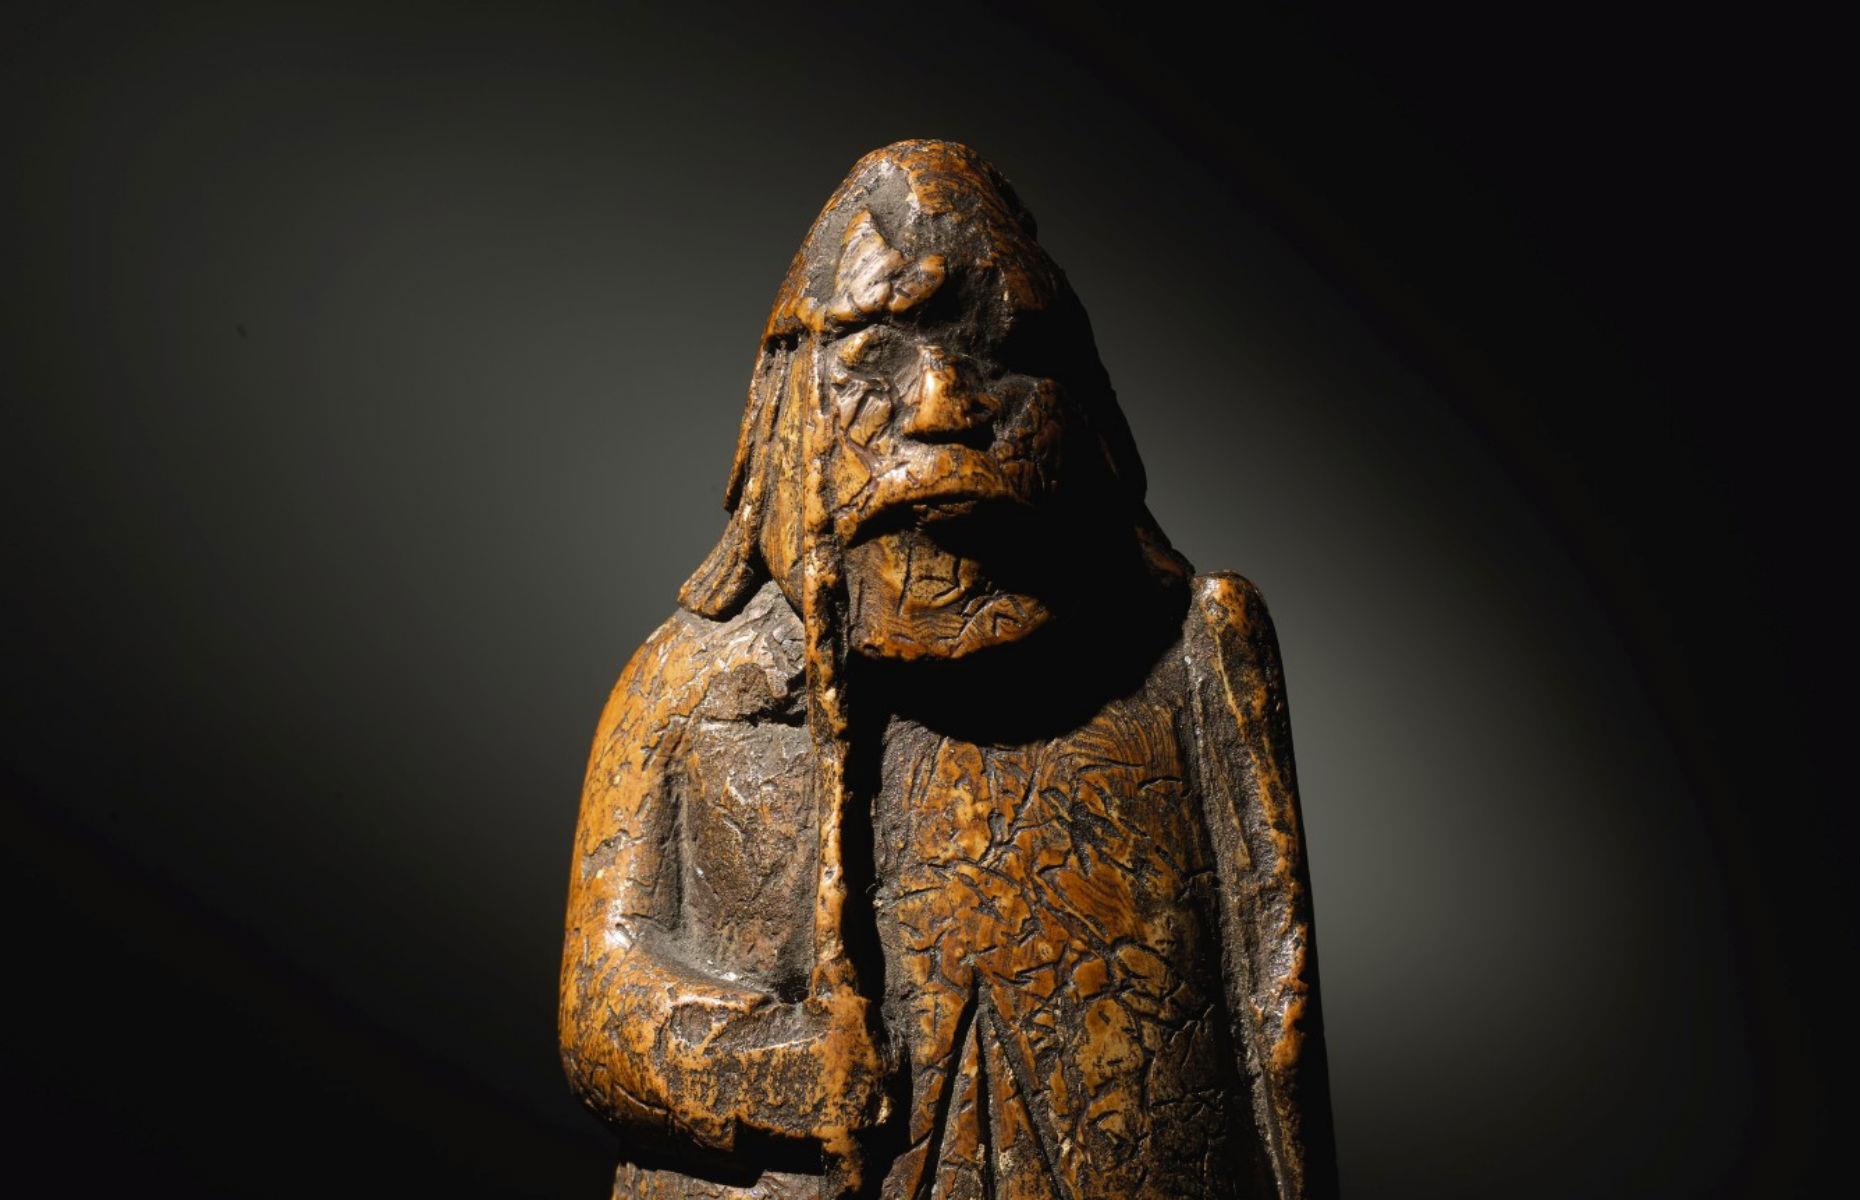 The lost 13th-century chess piece sold for $954,000 (£735k)